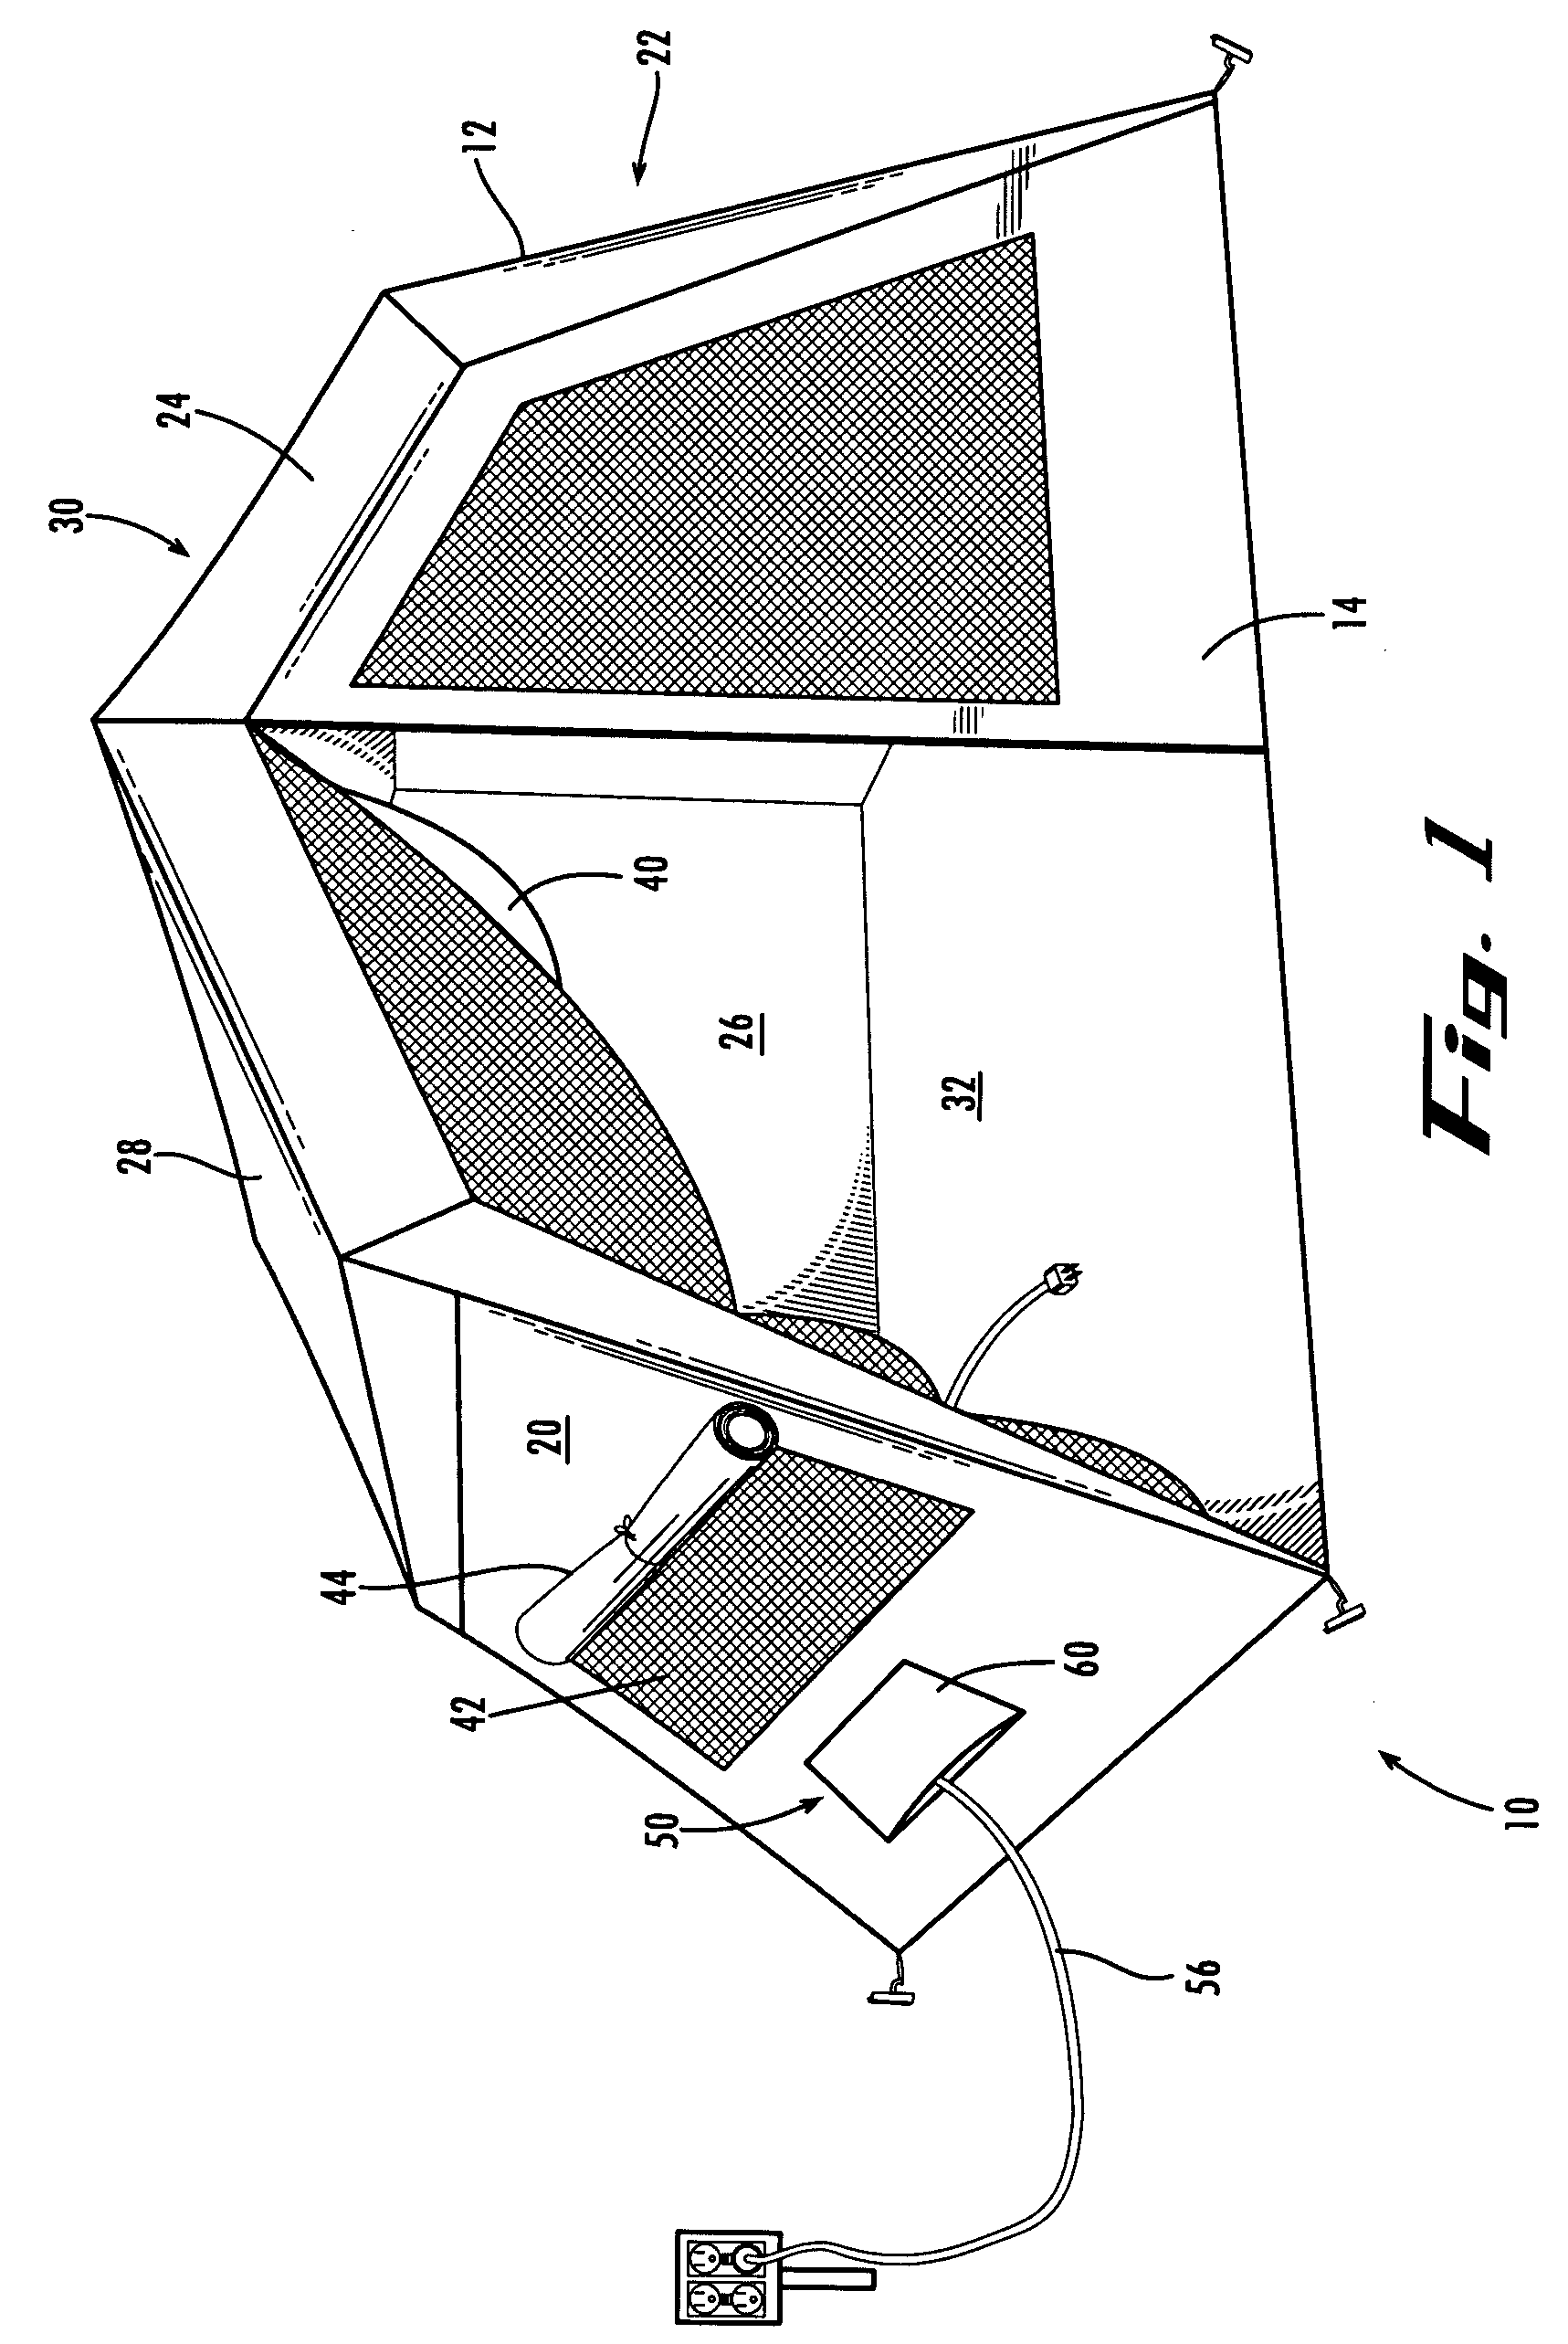 Tent with pass-through port